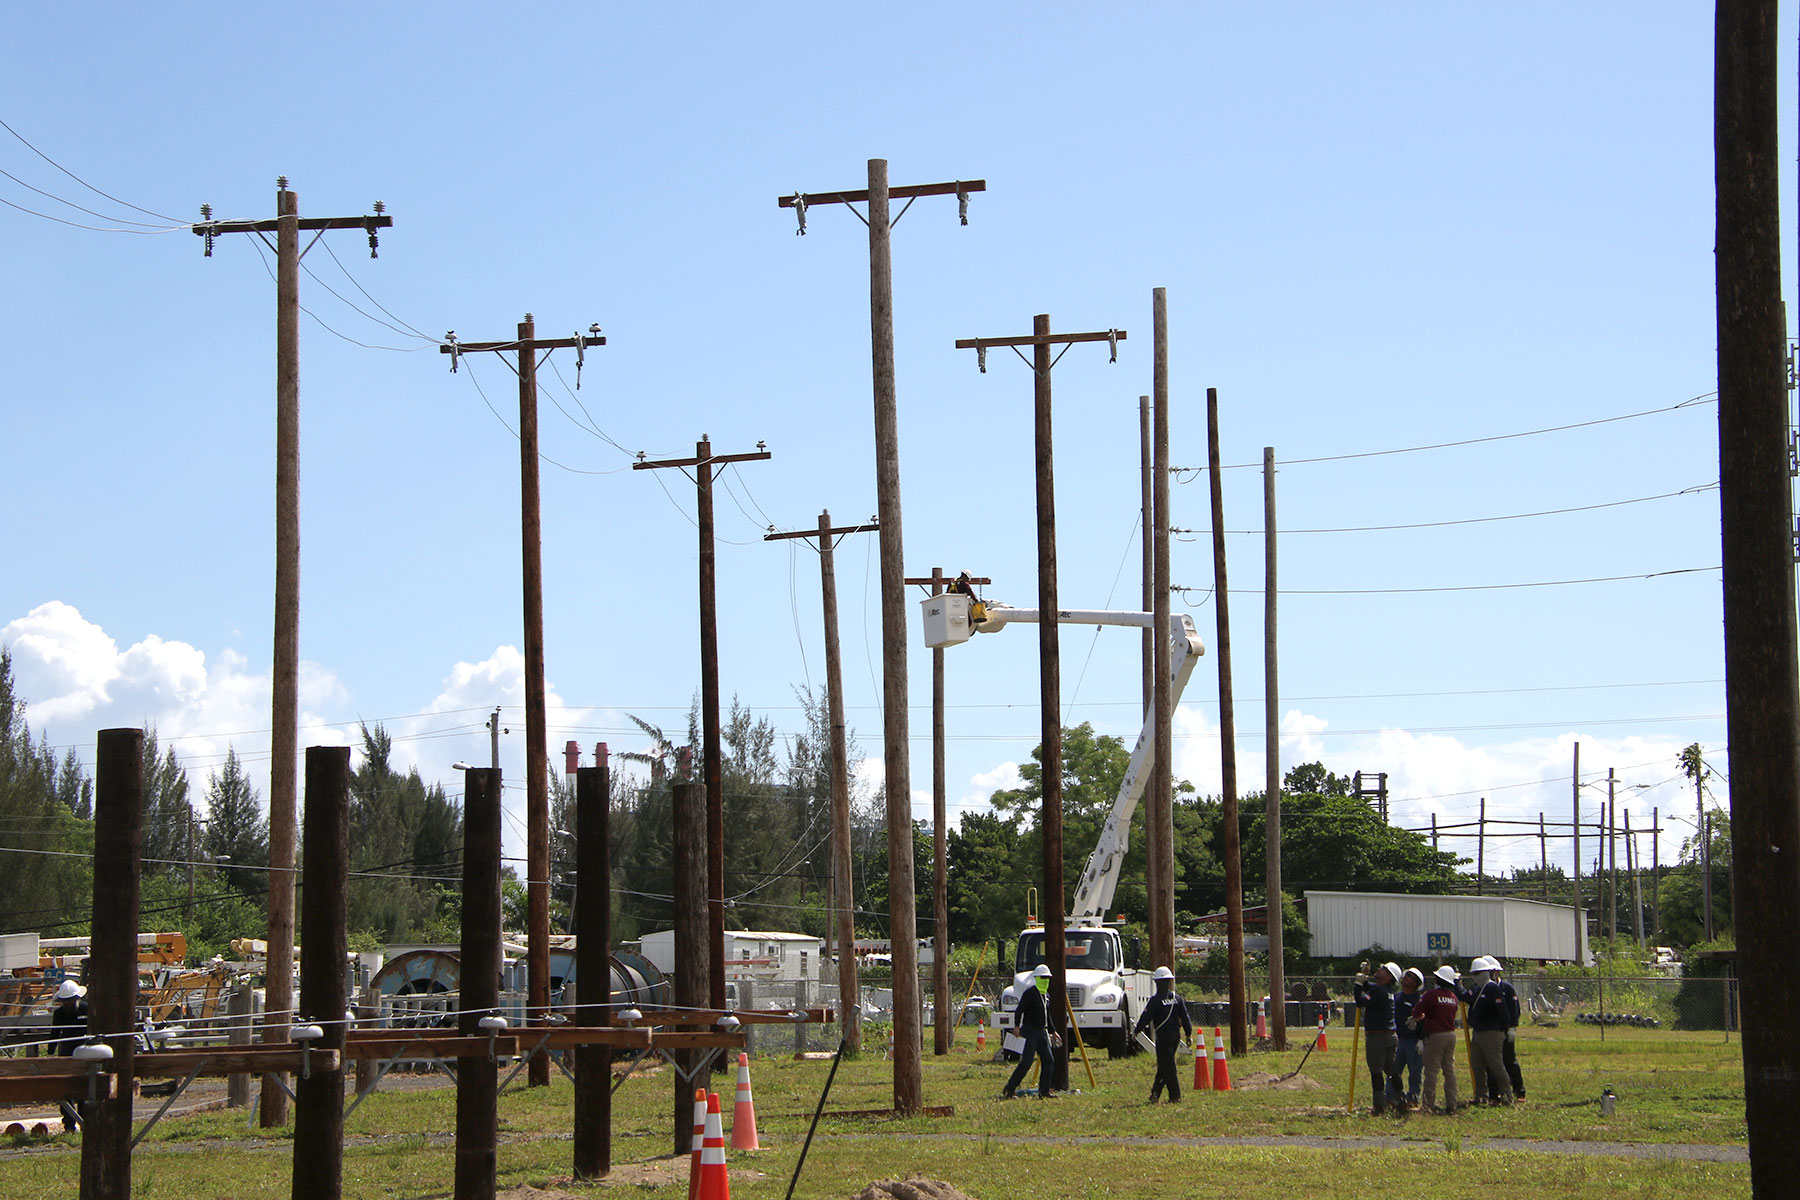 inventory of power poles